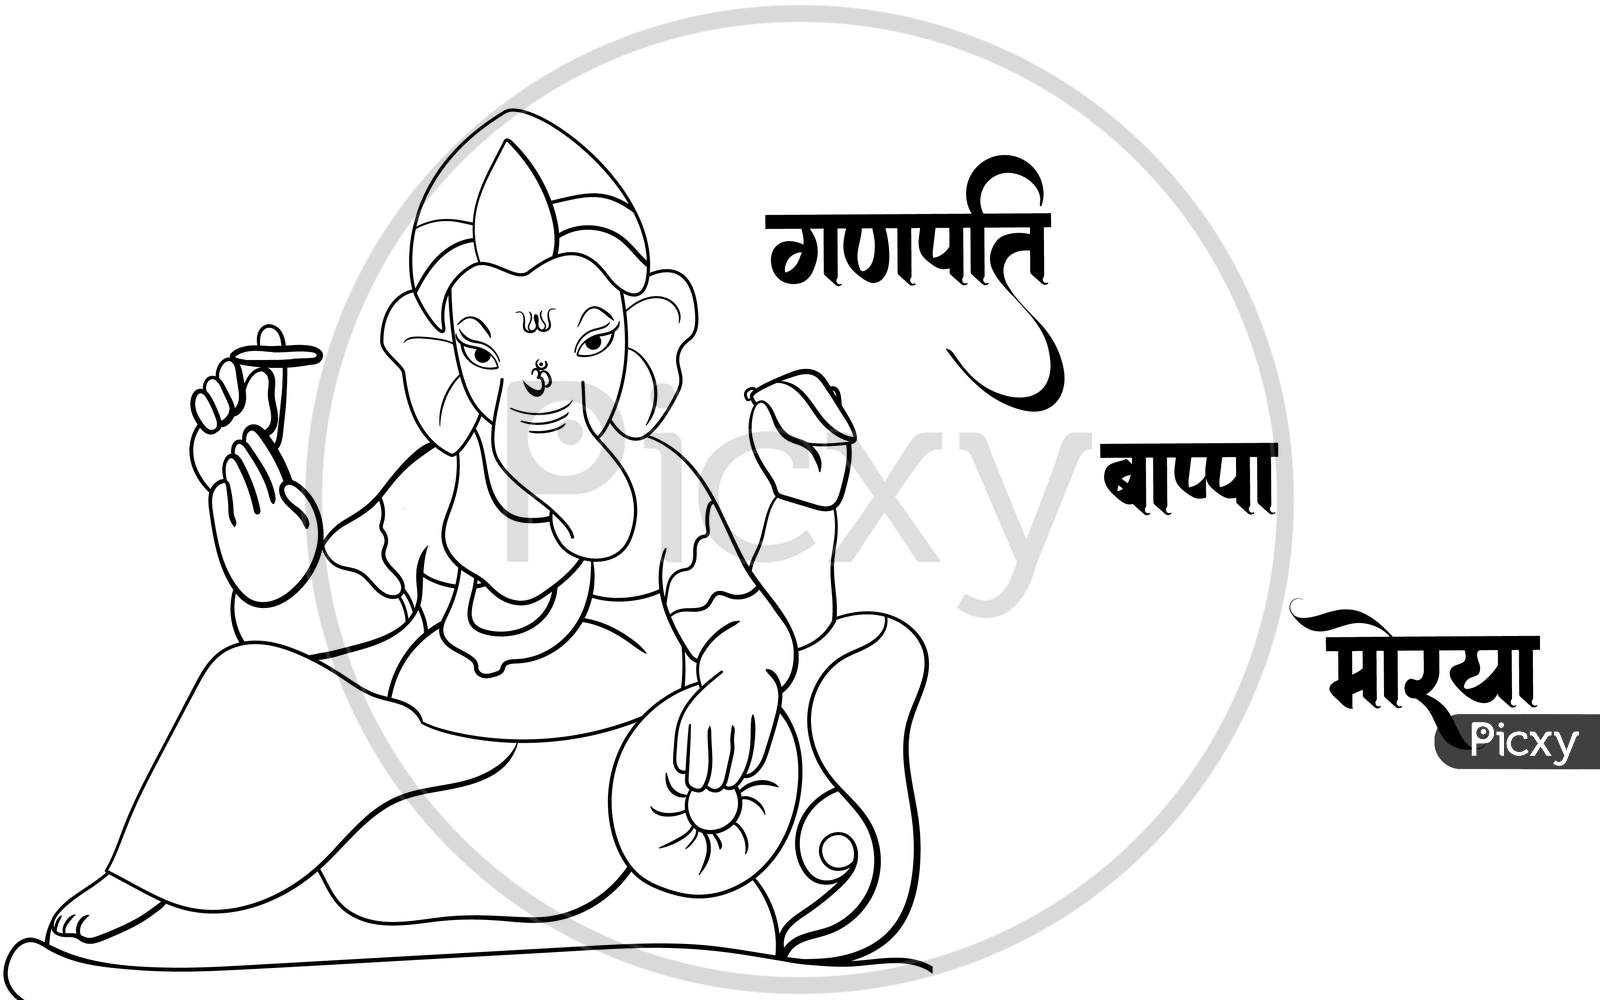 How to draw Ganesh chaurthi celebration drawing for beginners/ganesh  chaturthi special/ganesh utsav - YouTub… | Ganesh utsav, Ganesha drawing,  Drawing for beginners